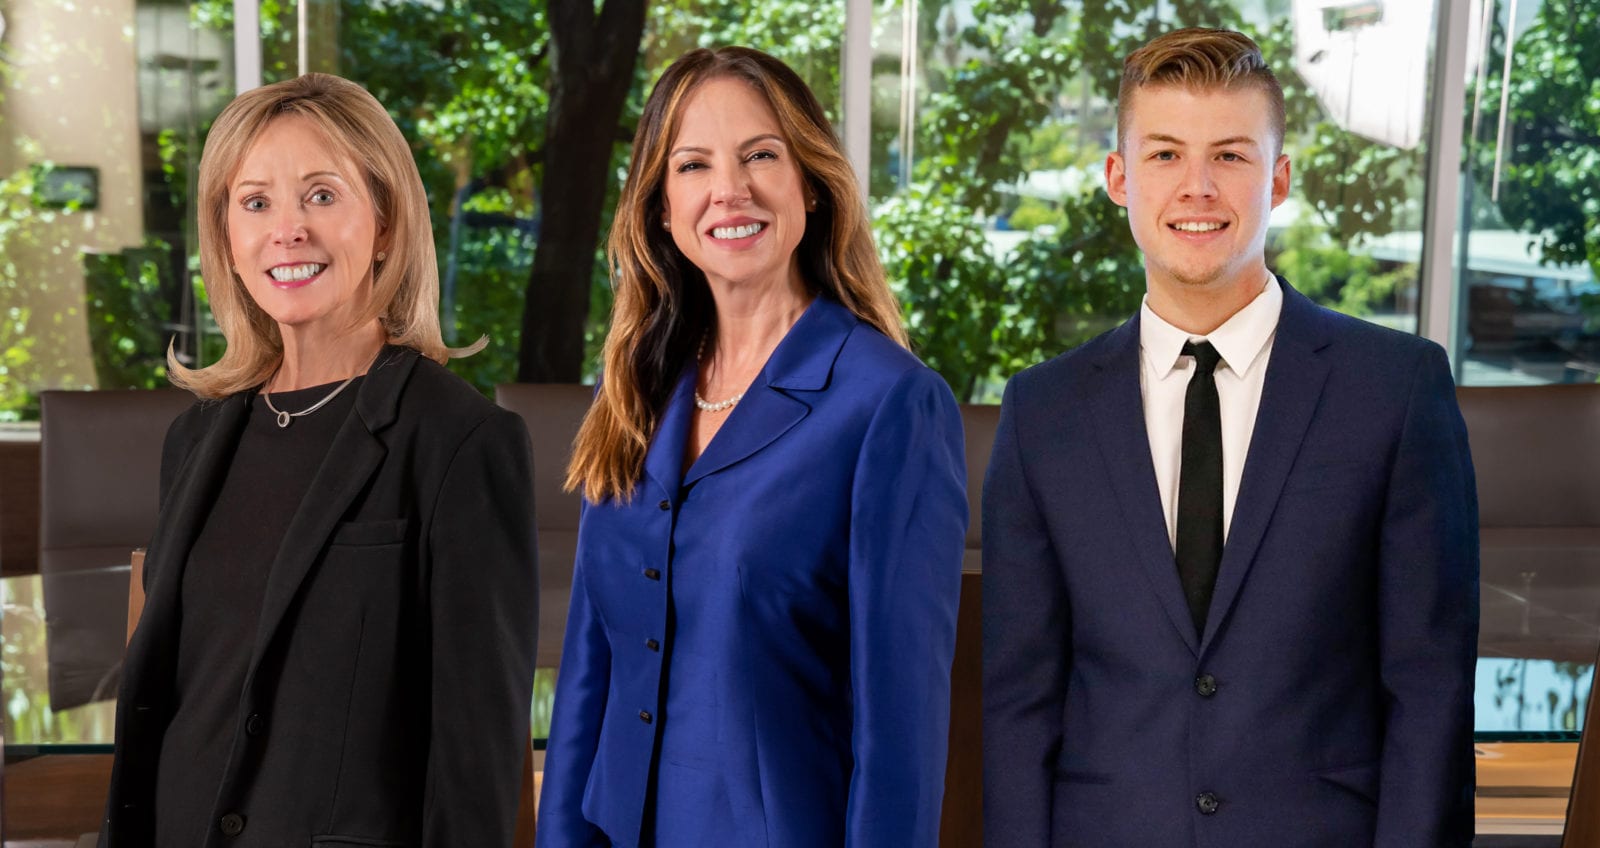 Investment Counsel Company Administration Team Lynn LeMond, Dawn Lubas, and Andrew Garcia